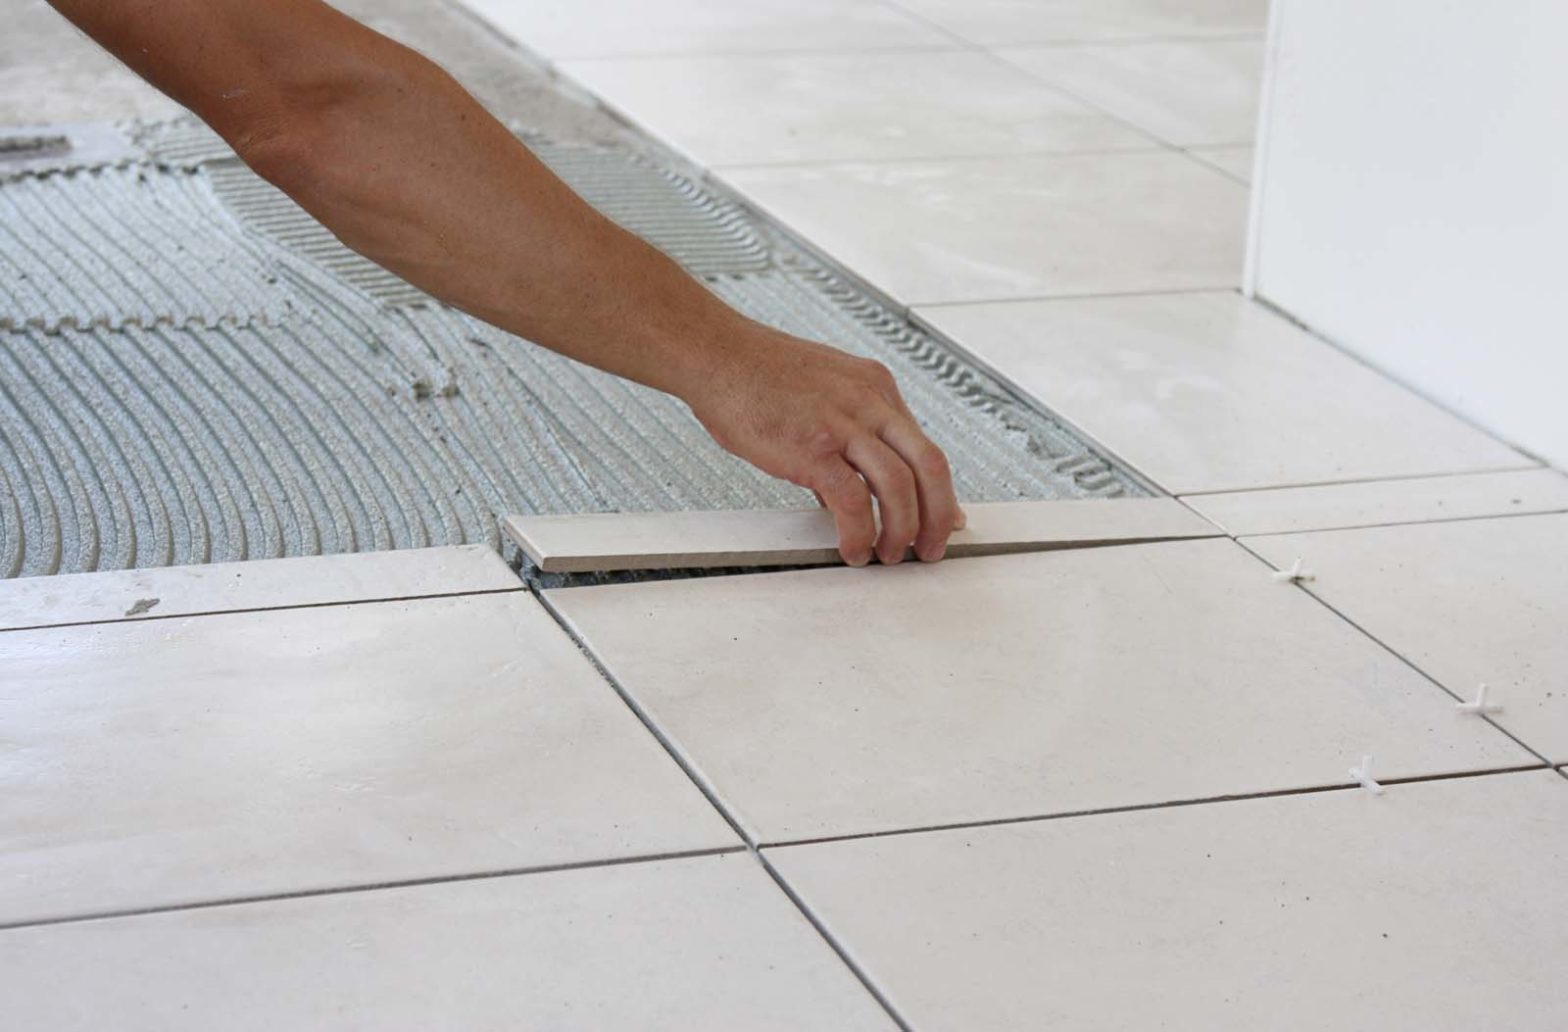 Not all tile adhesives are made equal - Choosing the correct tile adhesive